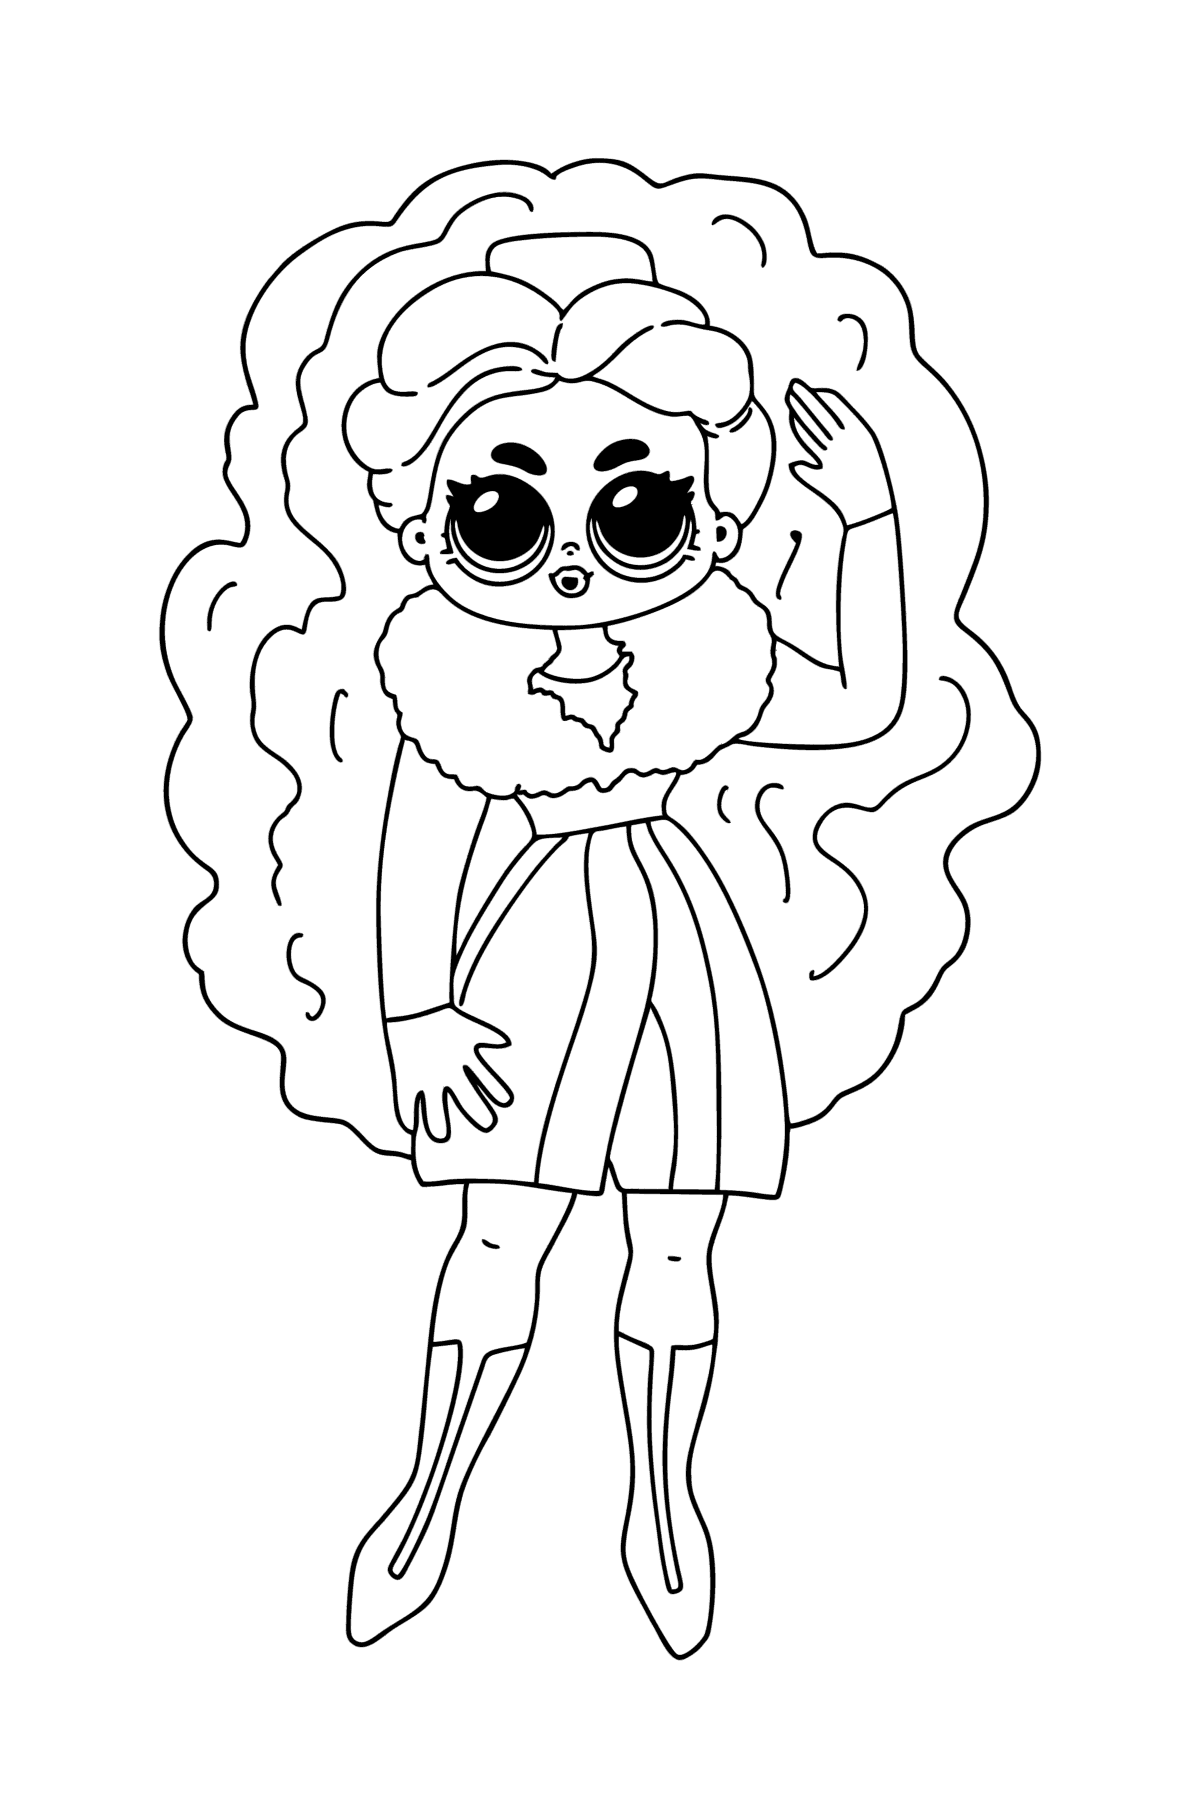 Coloring page LOL OMG Cute Girl - Coloring Pages for Kids